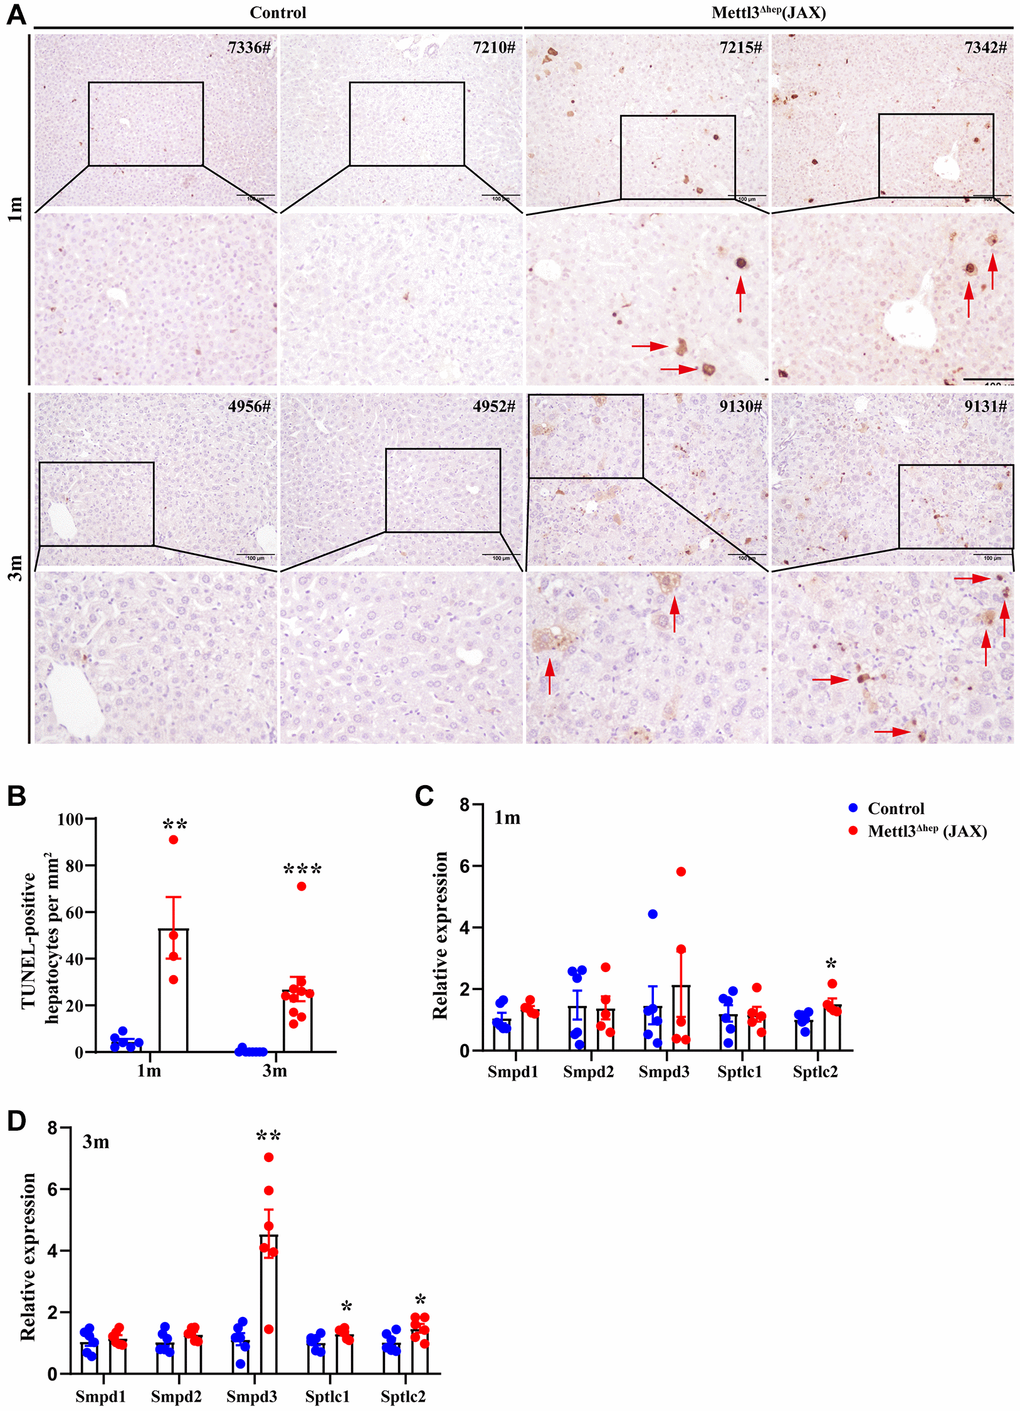 Hepatocyte-specific METTL3 homozygous ablation by Alb-Cre mice (JAX) results in apoptosis in mouse hepatocytes. (A) Representative TUNEL staining images of paraffin-embedded liver sections from control mice and METTL3Δhep mice (JAX) at 1 month or 3 months after birth. Scale bar = 100 μm. (B) Quantification of TUNEL-positive hepatocytes in paraffin-embedded liver sections from control mice and METTL3Δhep mice (JAX). (C, D) qRT-PCR analysis of the expression of genes related with sphingolipid metabolism in the liver of METTL3Δhep mice (JAX).